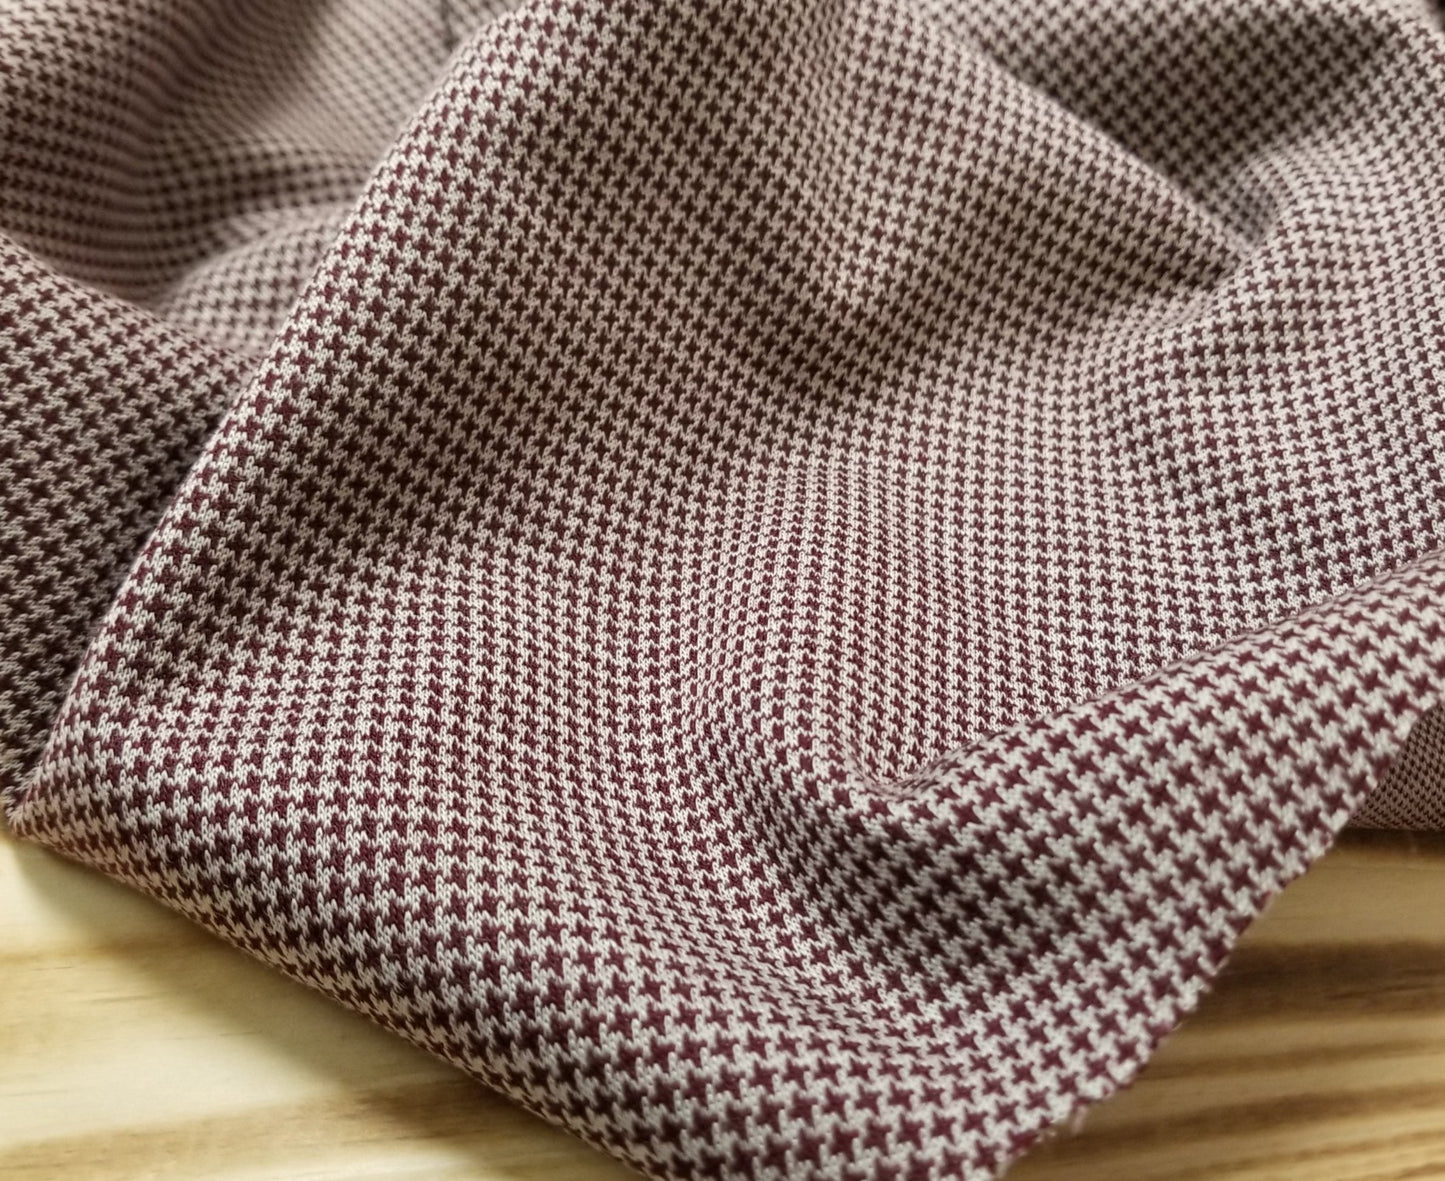 Designer Deadstock Burgundy and Cream Wool Blend Medium Weight Small Houndstooth Knit ( Ponte Hand) 8.5 oz- Sold by the yard